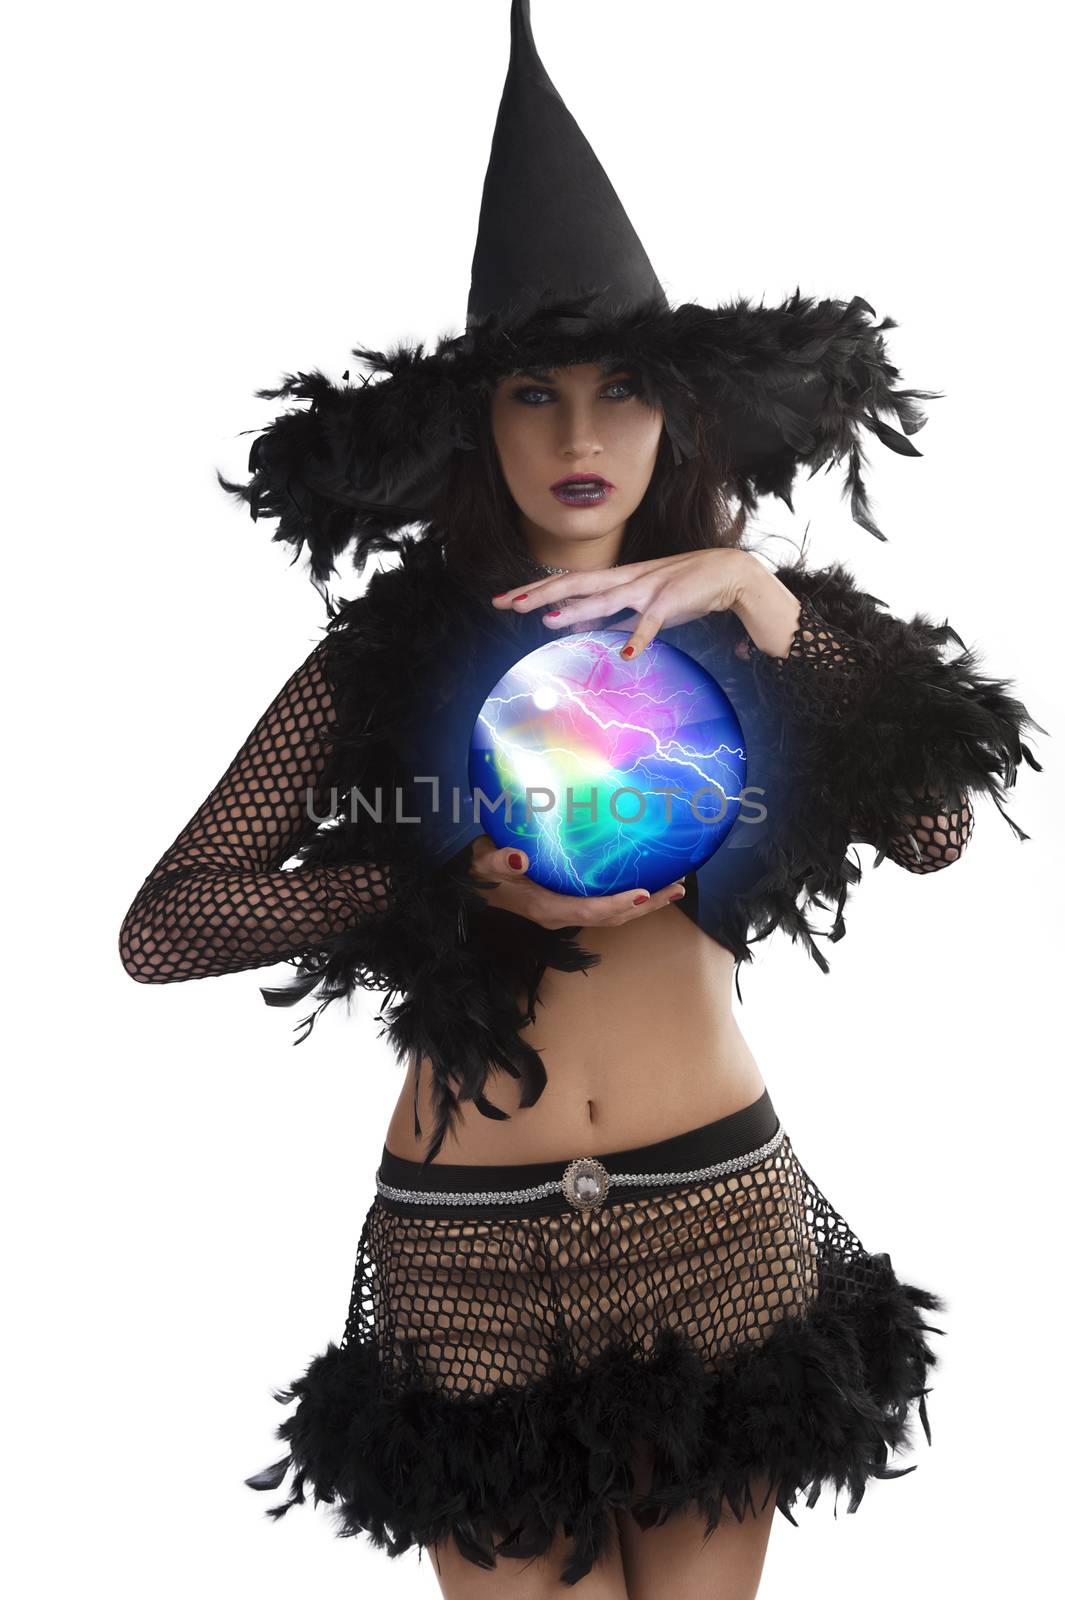 close up portrait of a cute girl in witch black dress and hat reading a future with a ball against white background